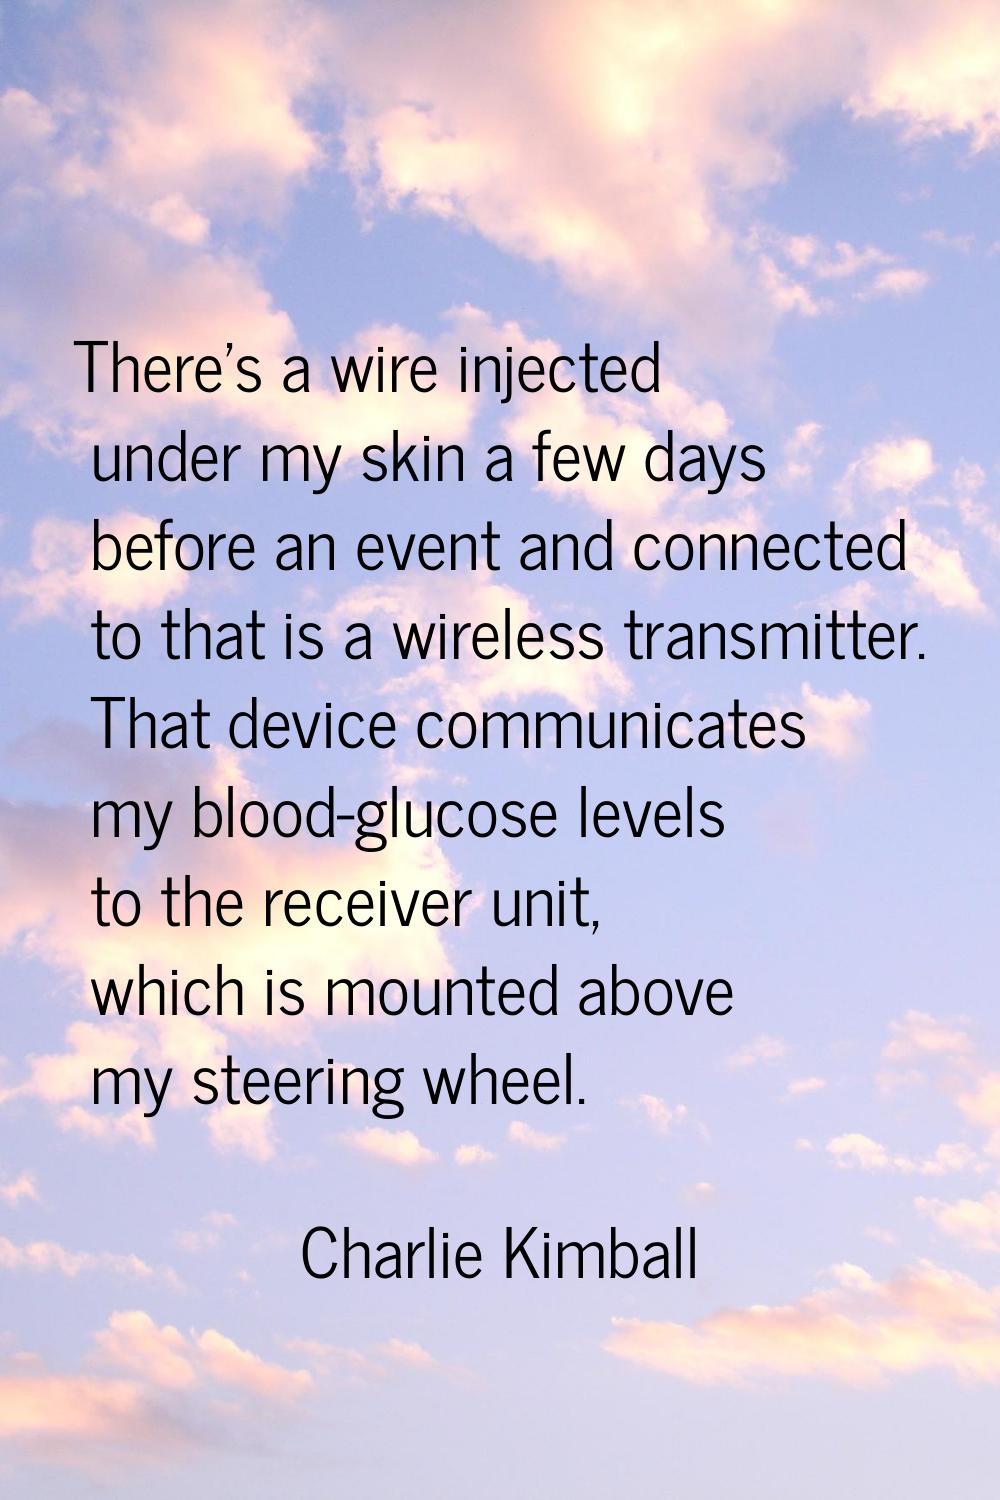 There's a wire injected under my skin a few days before an event and connected to that is a wireles